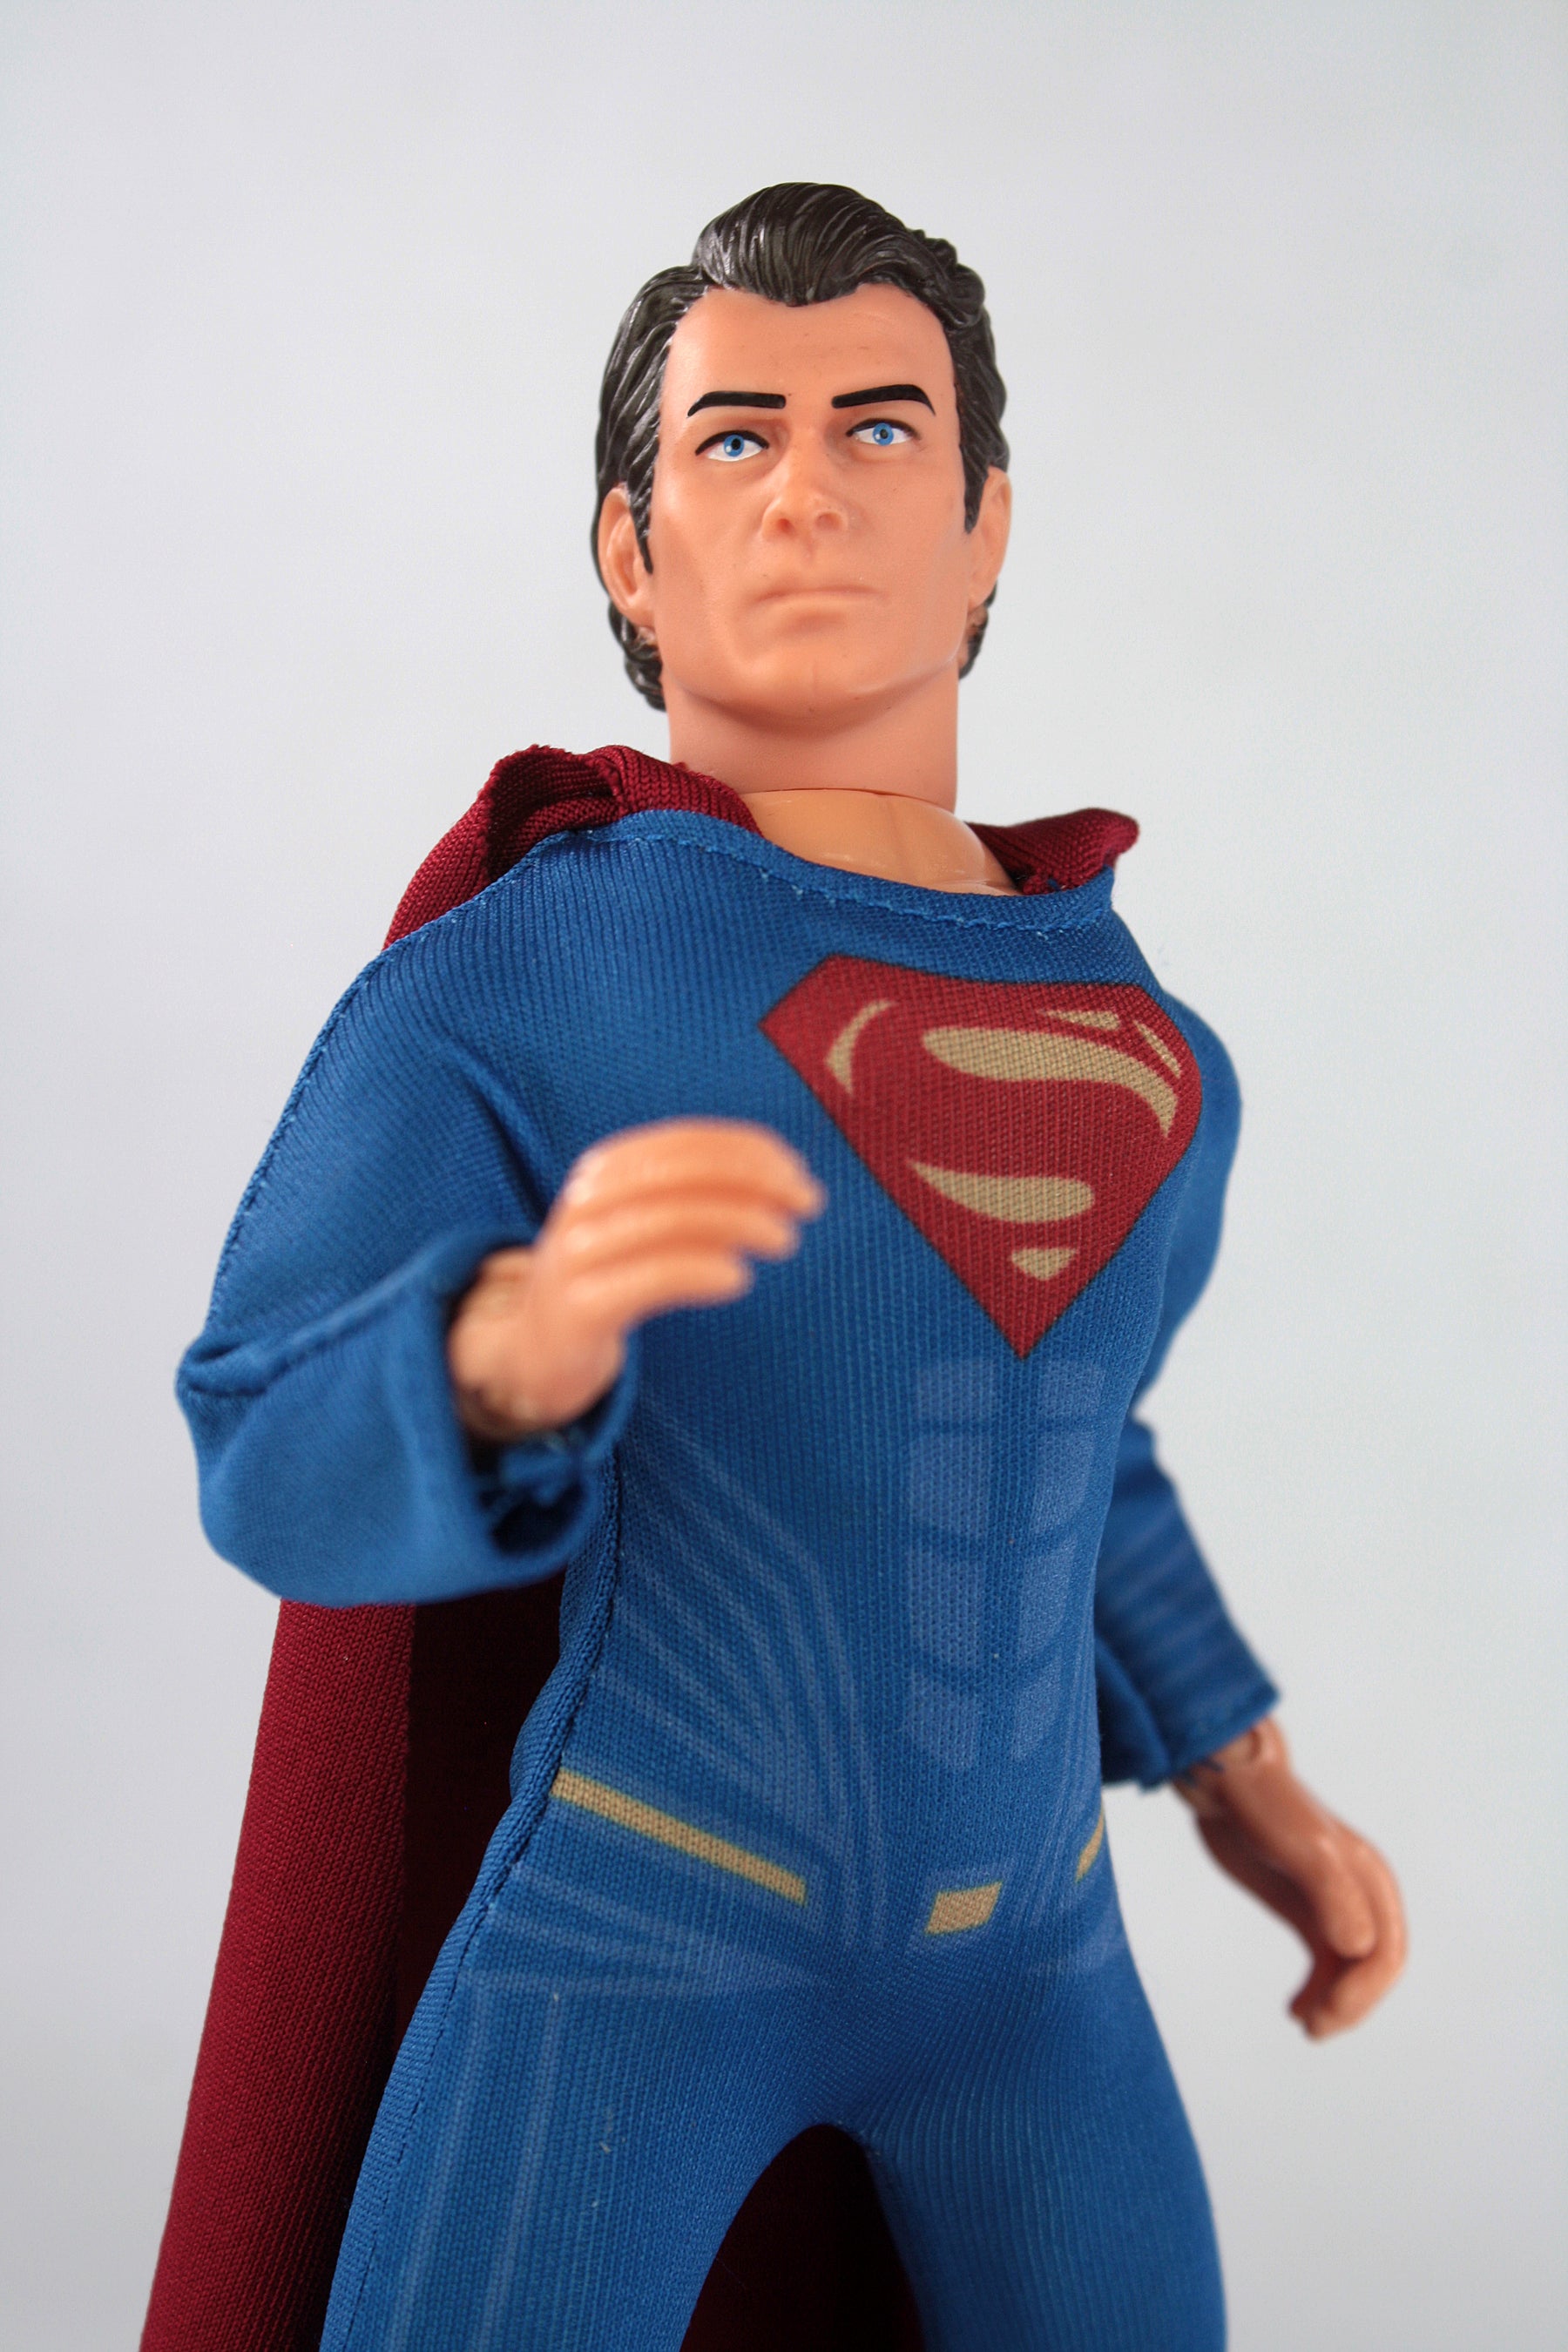 Mego Action Figure 8 inch - DC - Henry Cavill Superman